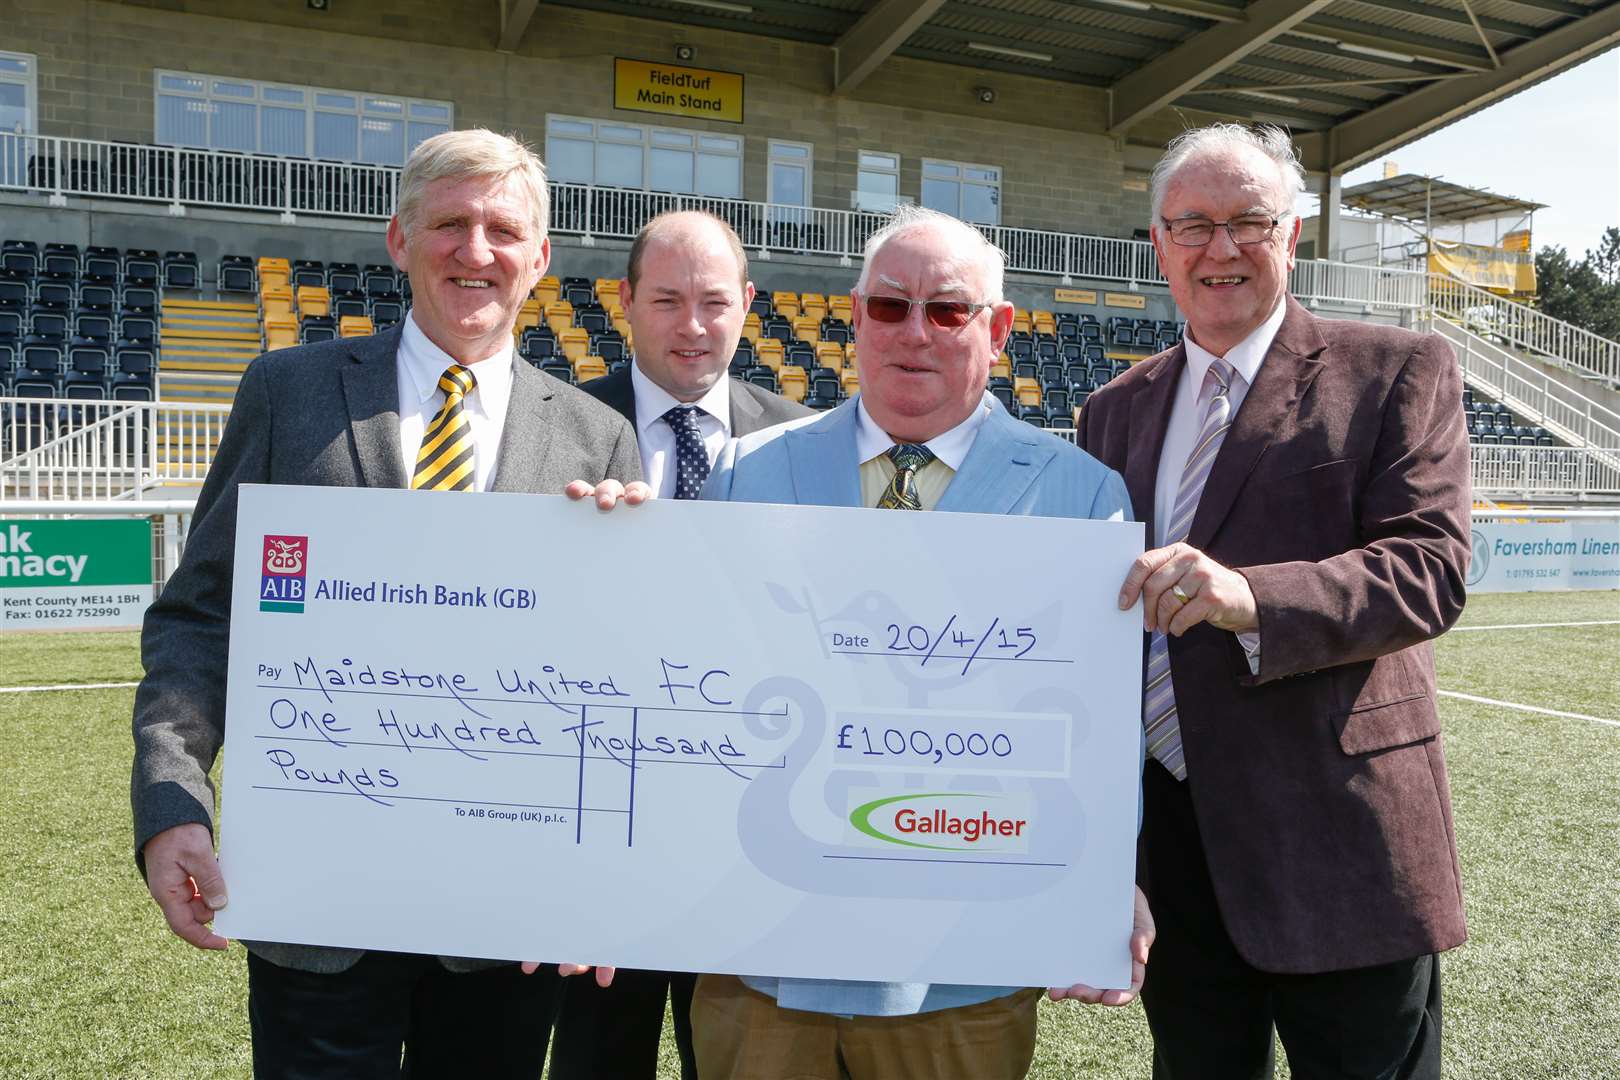 Pat Gallagher extends naming rights on The Gallagher Stadium until 2022. Pictured are: Terry Casey, Stephen Gallagher, Pat Gallagher and Bill Williams with the cheque. Picture: Matthew Walker FM3765679